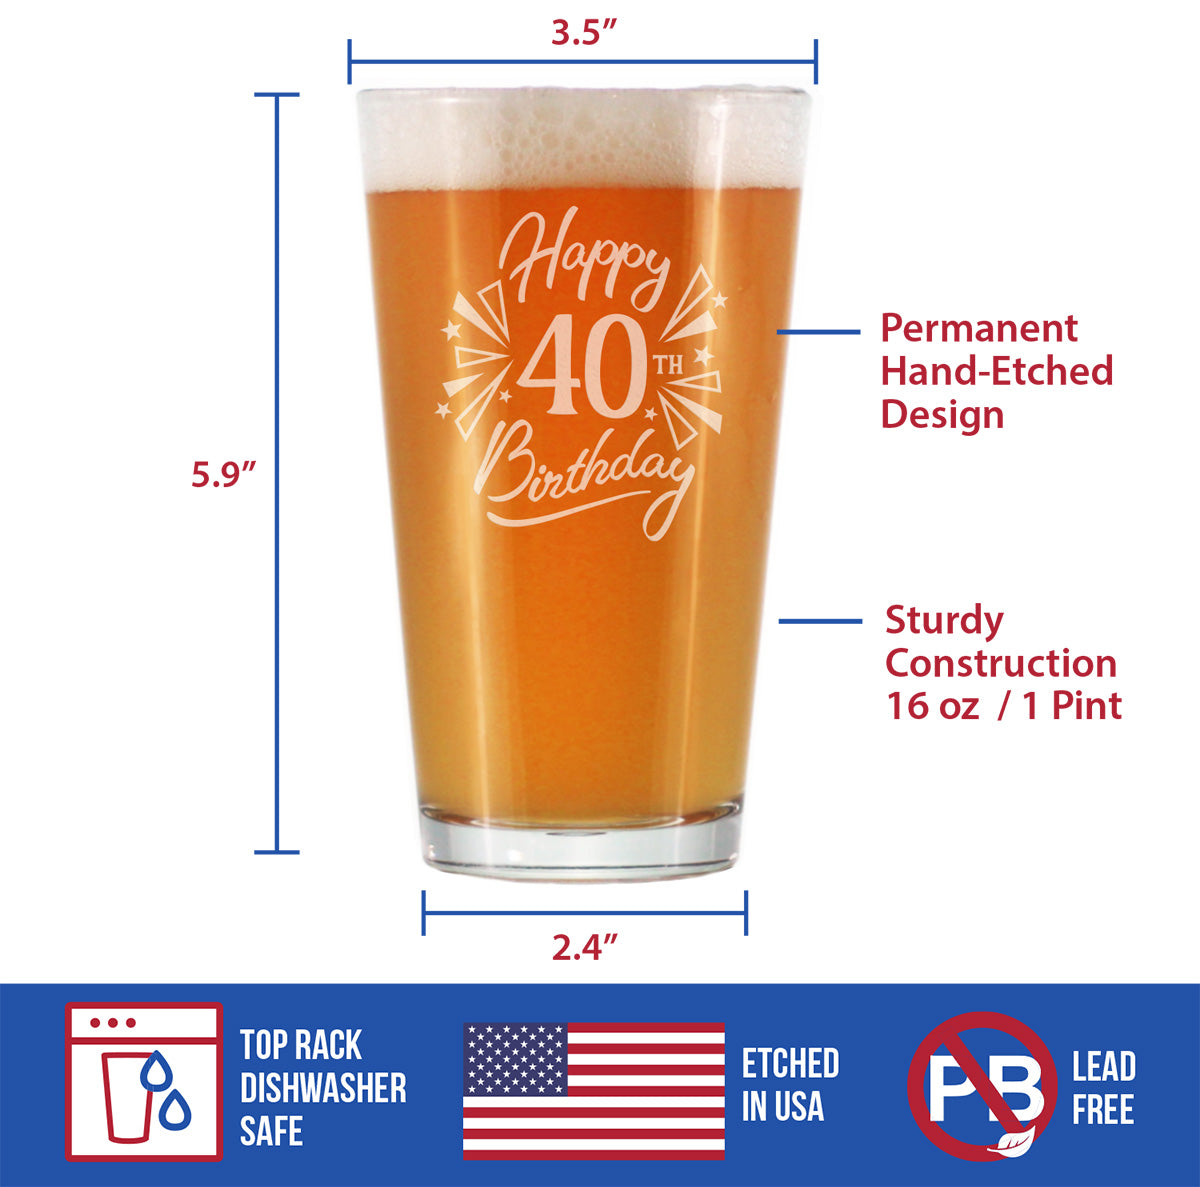 Happy 40th Birthday - Pint Glass for Beer - Gifts for Women &amp; Men Turning 40 - Fun Bday Party Decor - 16 Oz